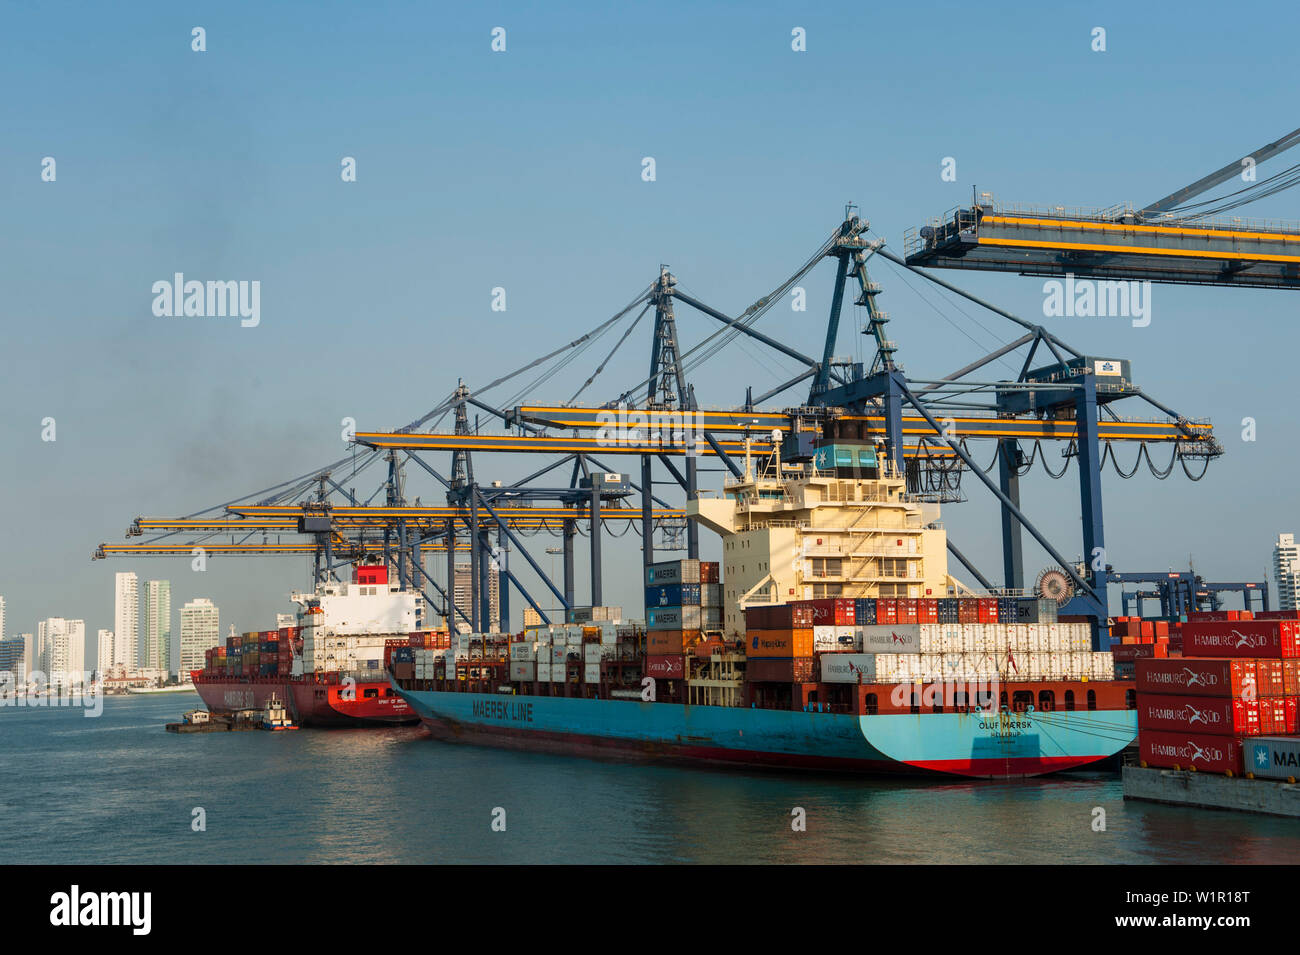 Two container ships are loaded and unloaded by a row of cranes in the port, Cartagena, Bolivar, Colombia, South America Stock Photo